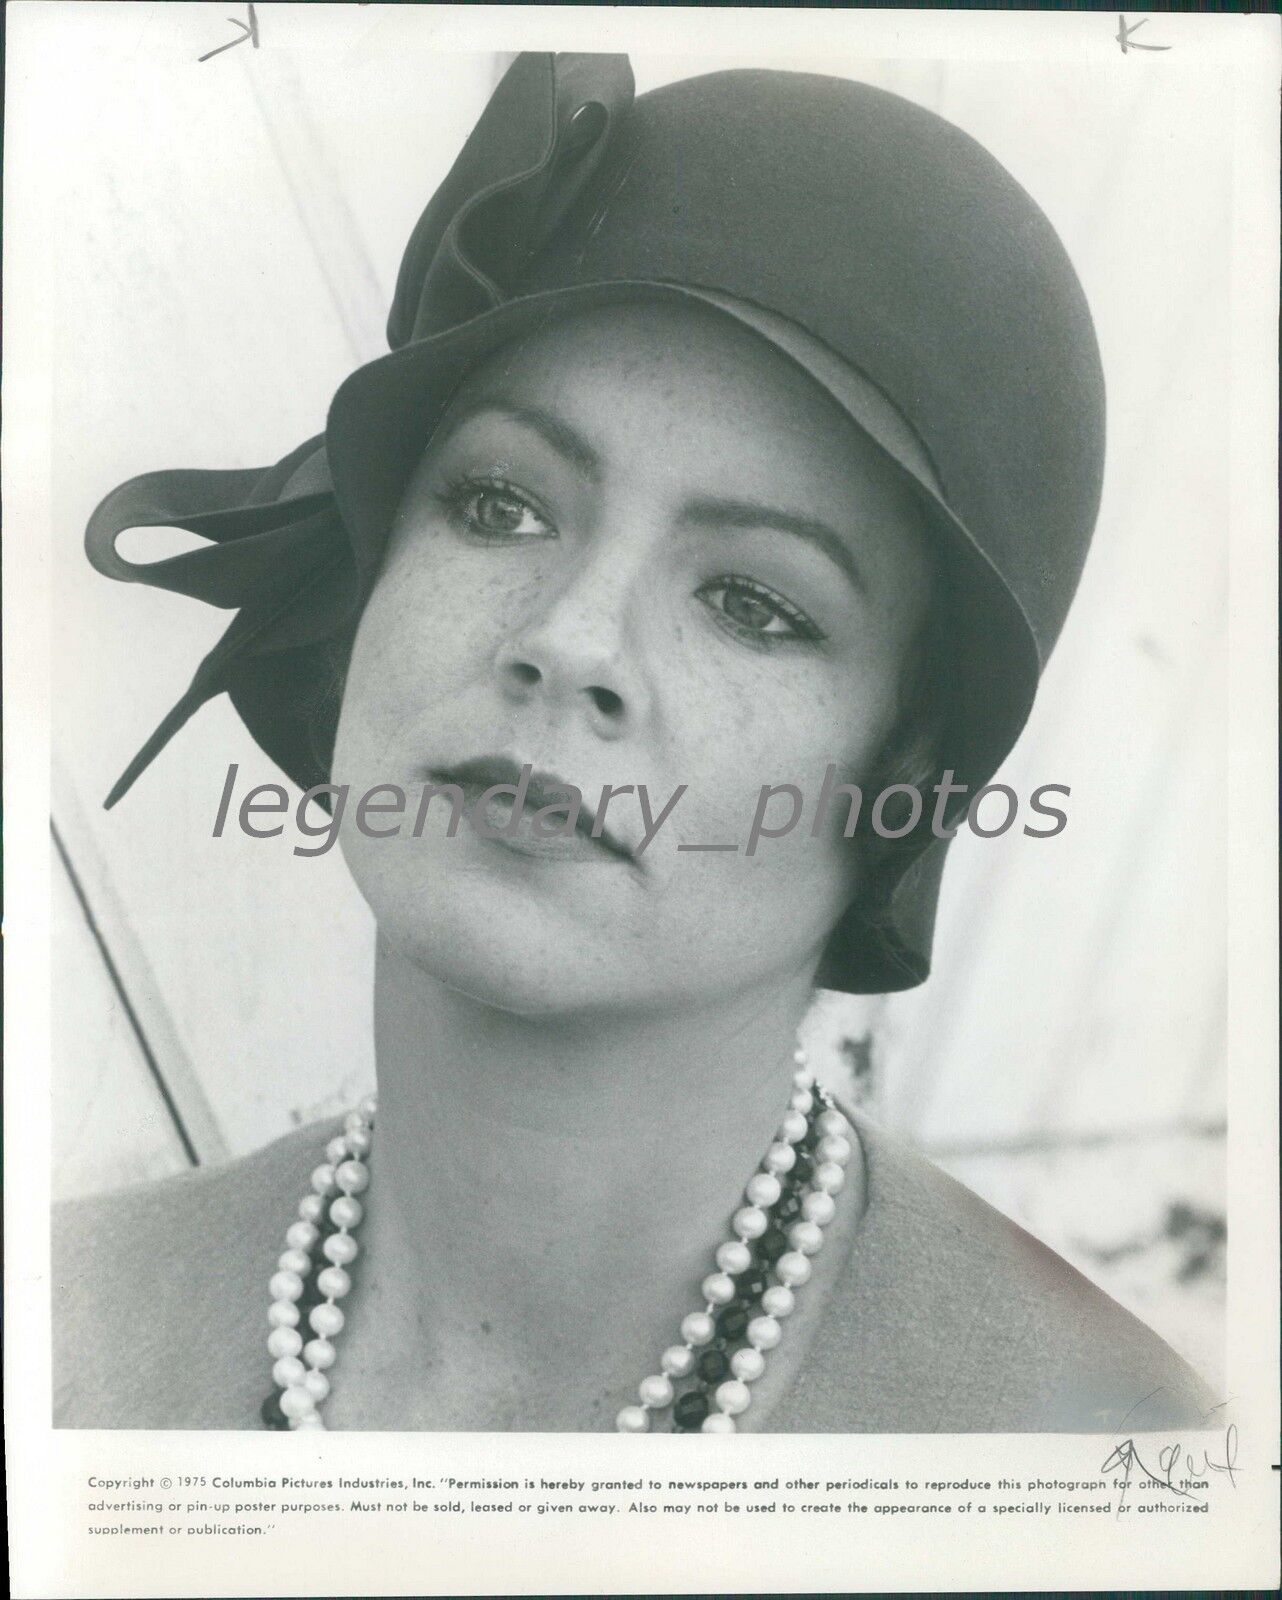 1975 Stockard Channing in The Fortune Original News Service Photo